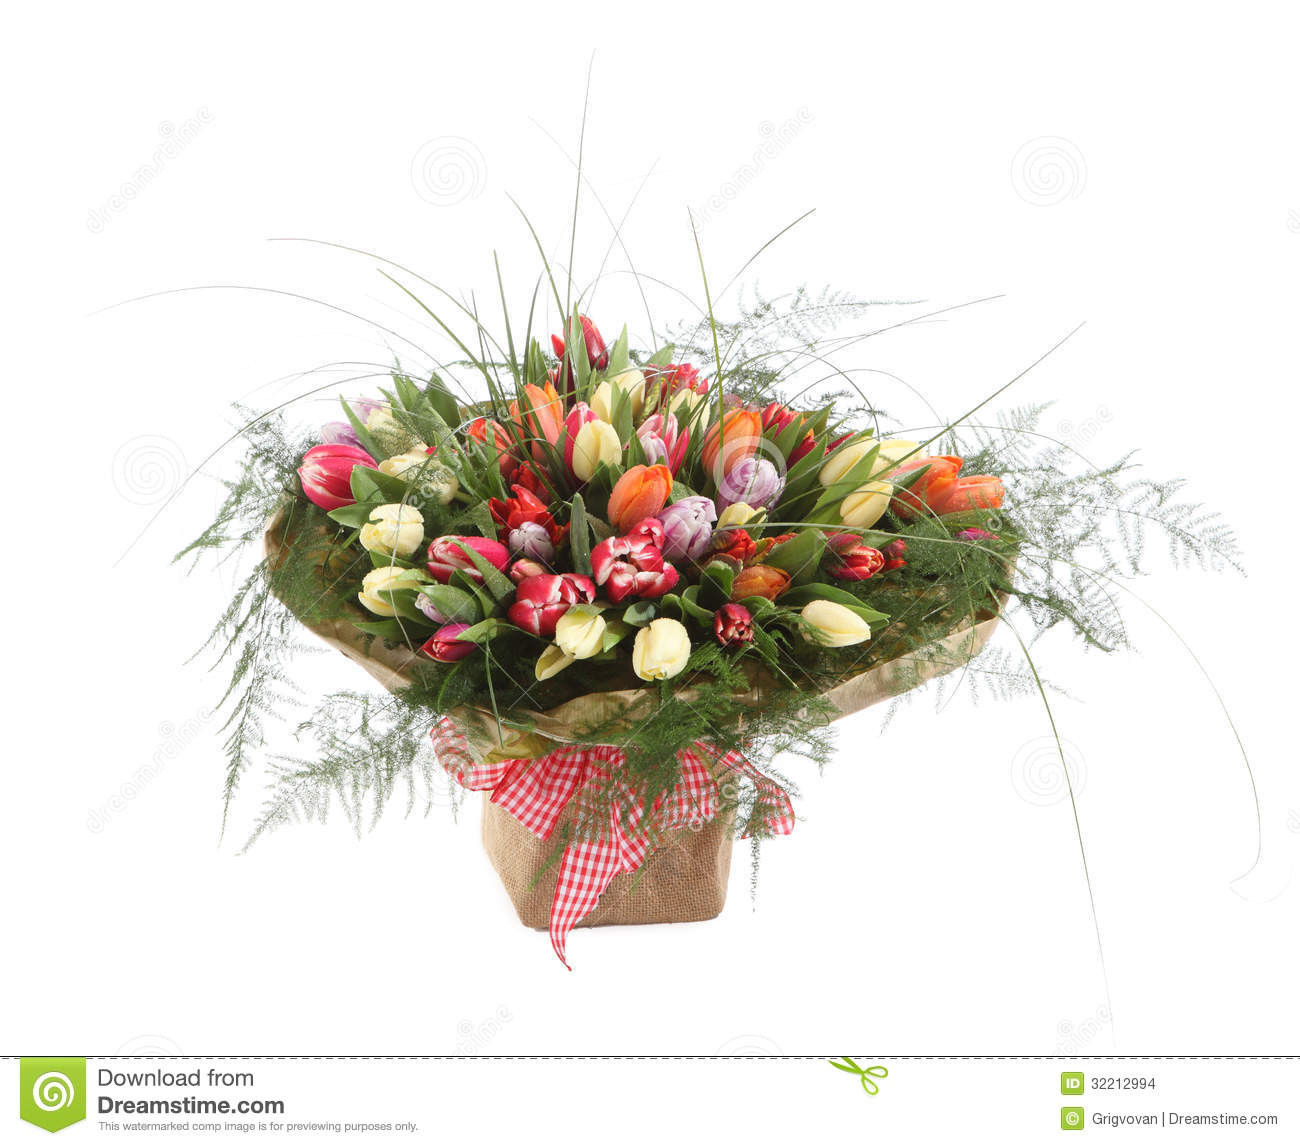 18 attractive Tall Vase Floral Arrangements 2024 free download tall vase floral arrangements of a large bouquet of color tulips in a square vase stock photo within a large bouquet of color tulips in a square vase